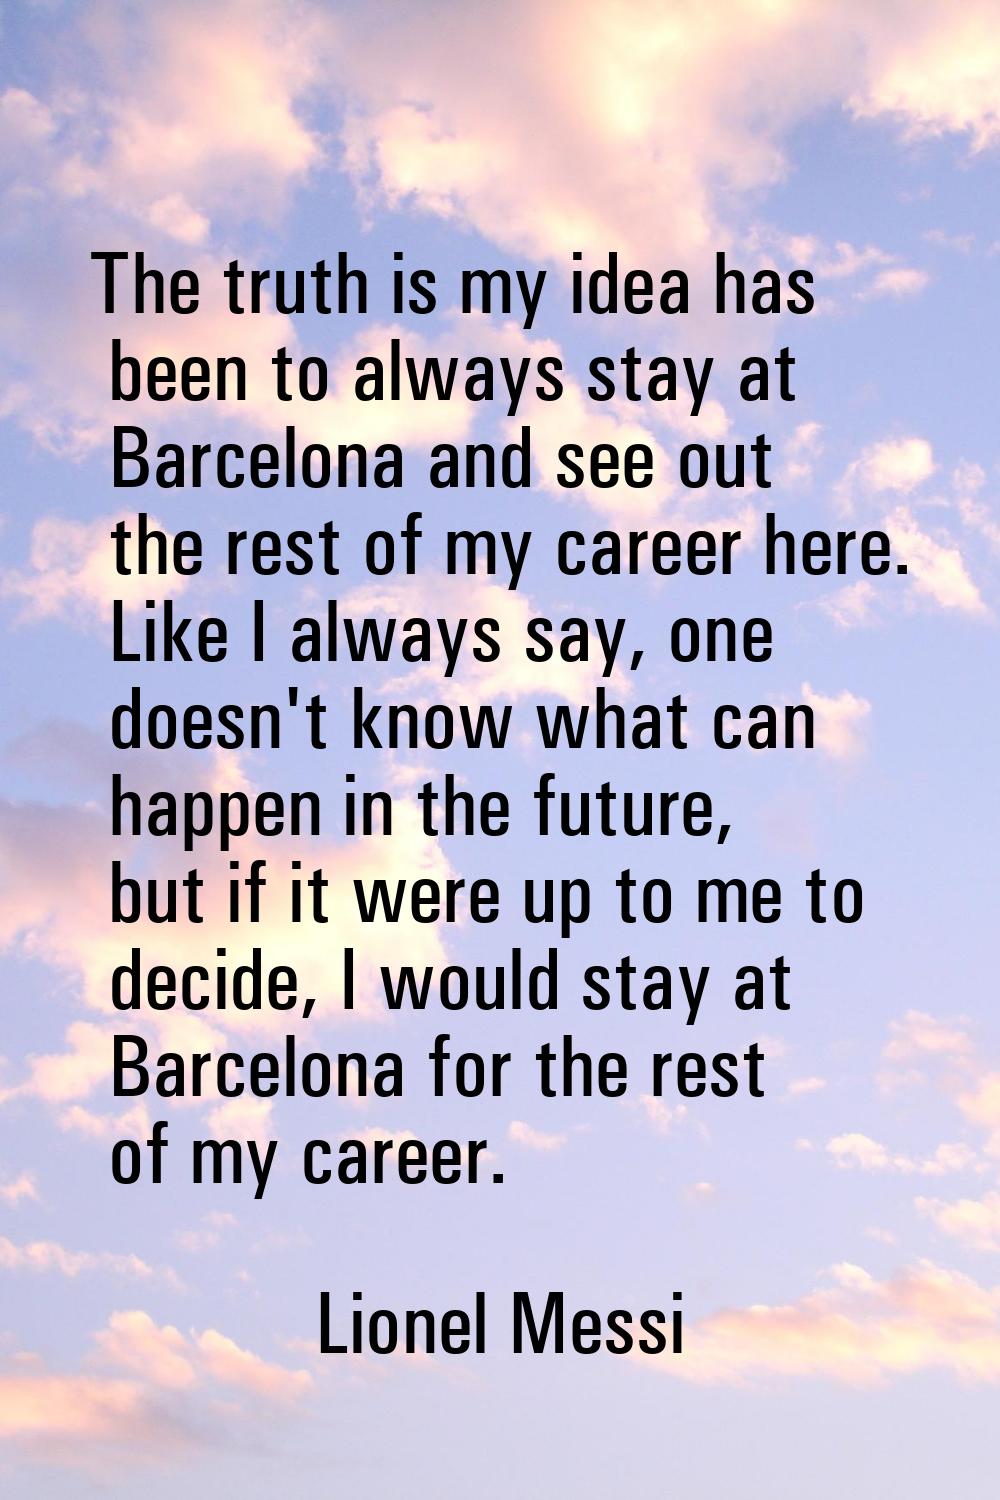 The truth is my idea has been to always stay at Barcelona and see out the rest of my career here. L